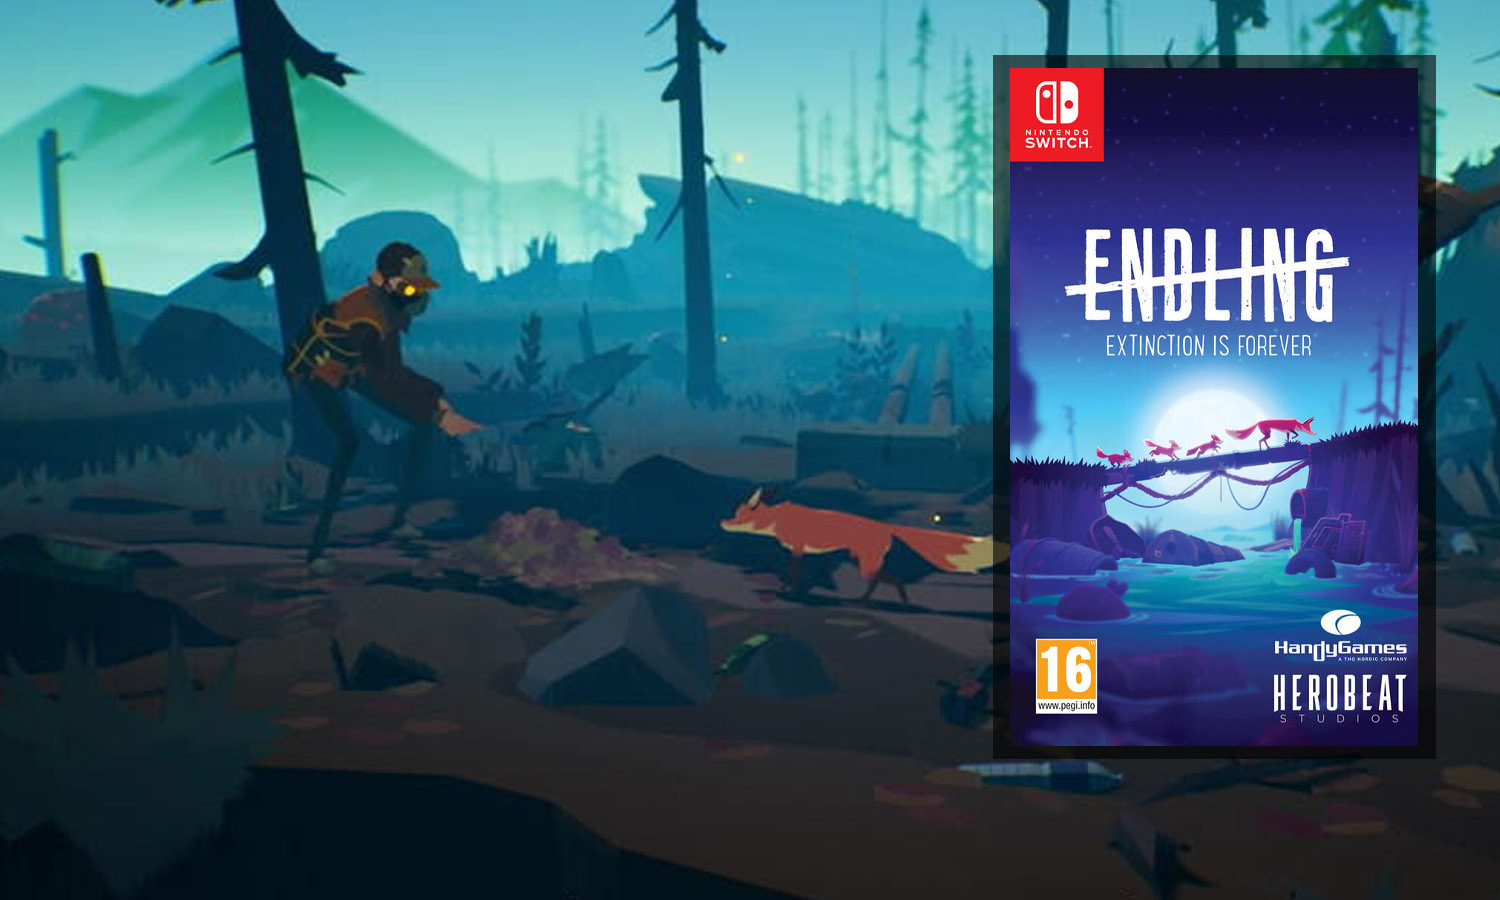 download endling extinction is forever nintendo switch